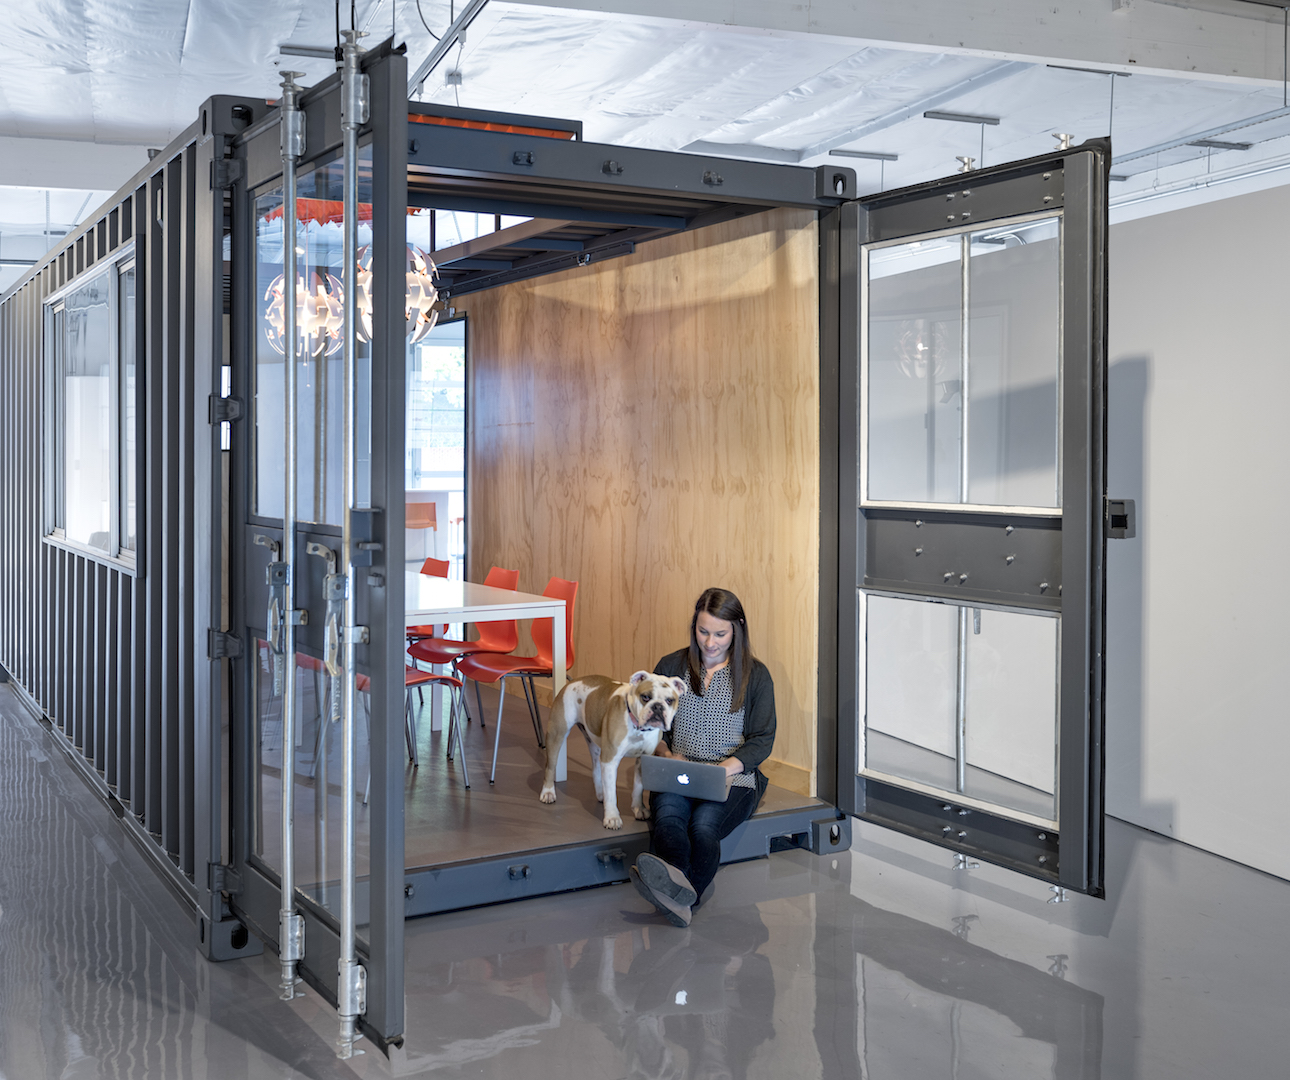 The container cargo doors are usually closed, but can be opened when needed.